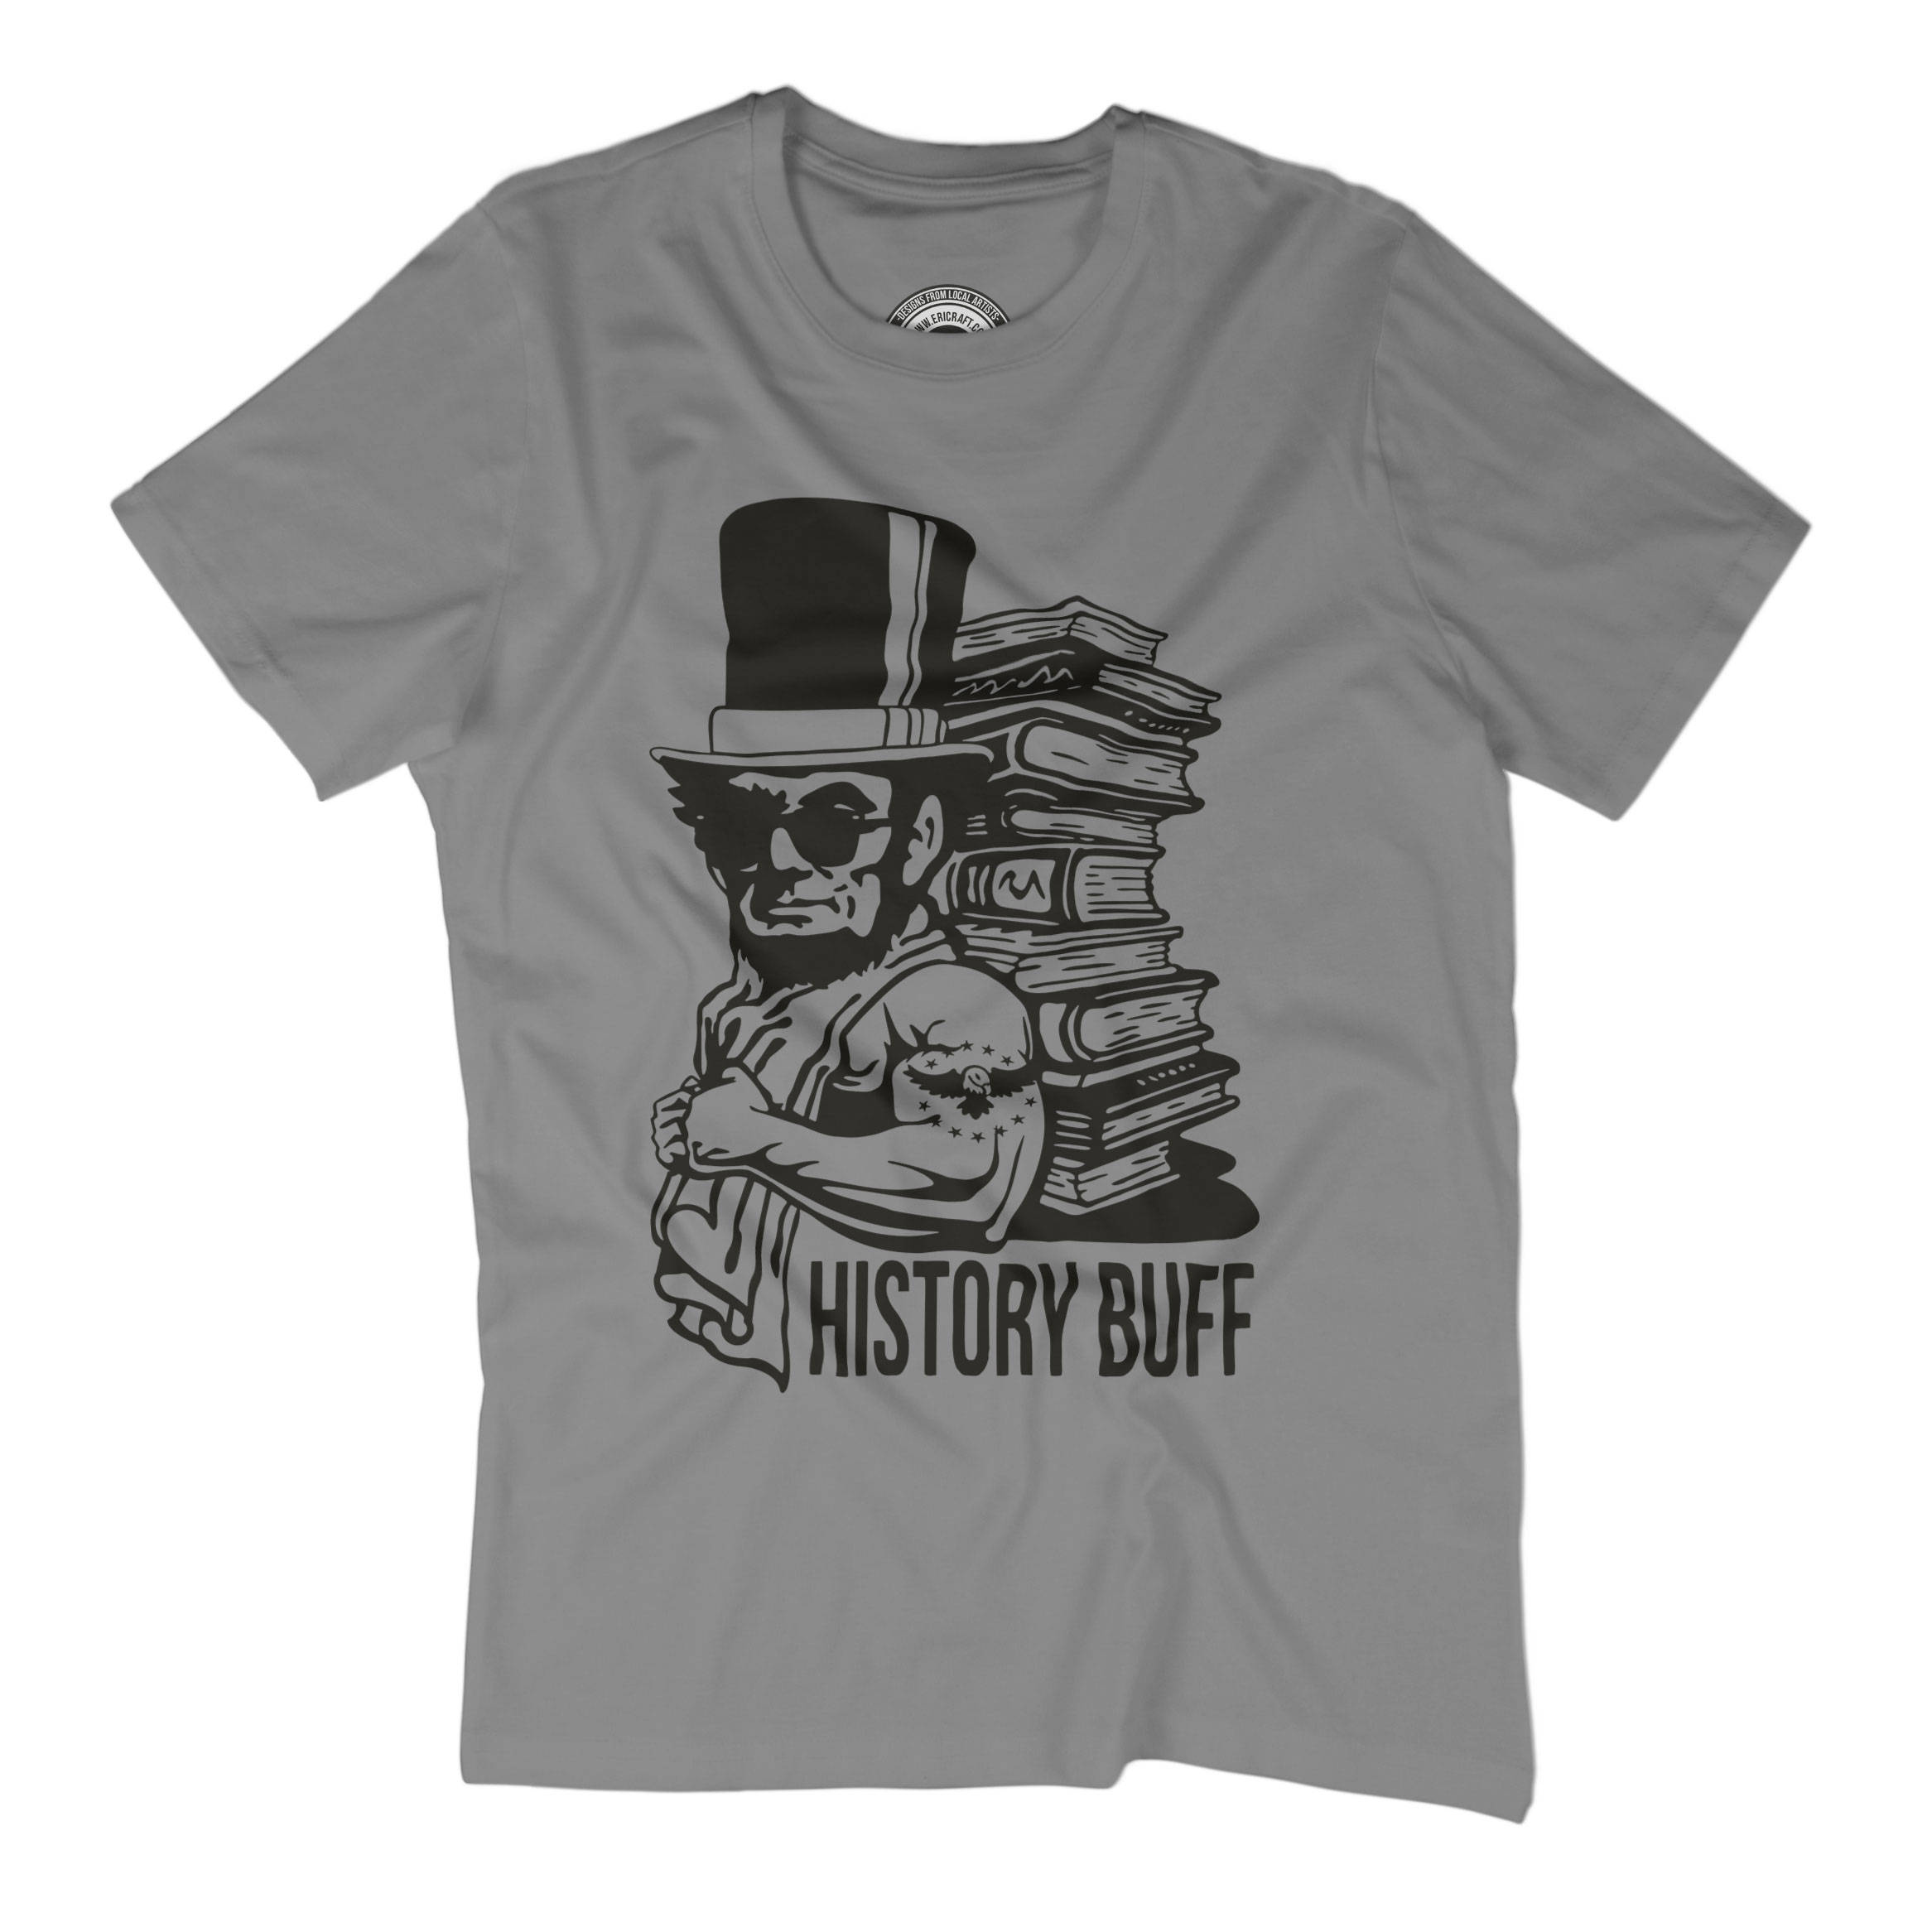 HUSBAND GIFT History buff shirt Geeky gift Abe Lincoln t